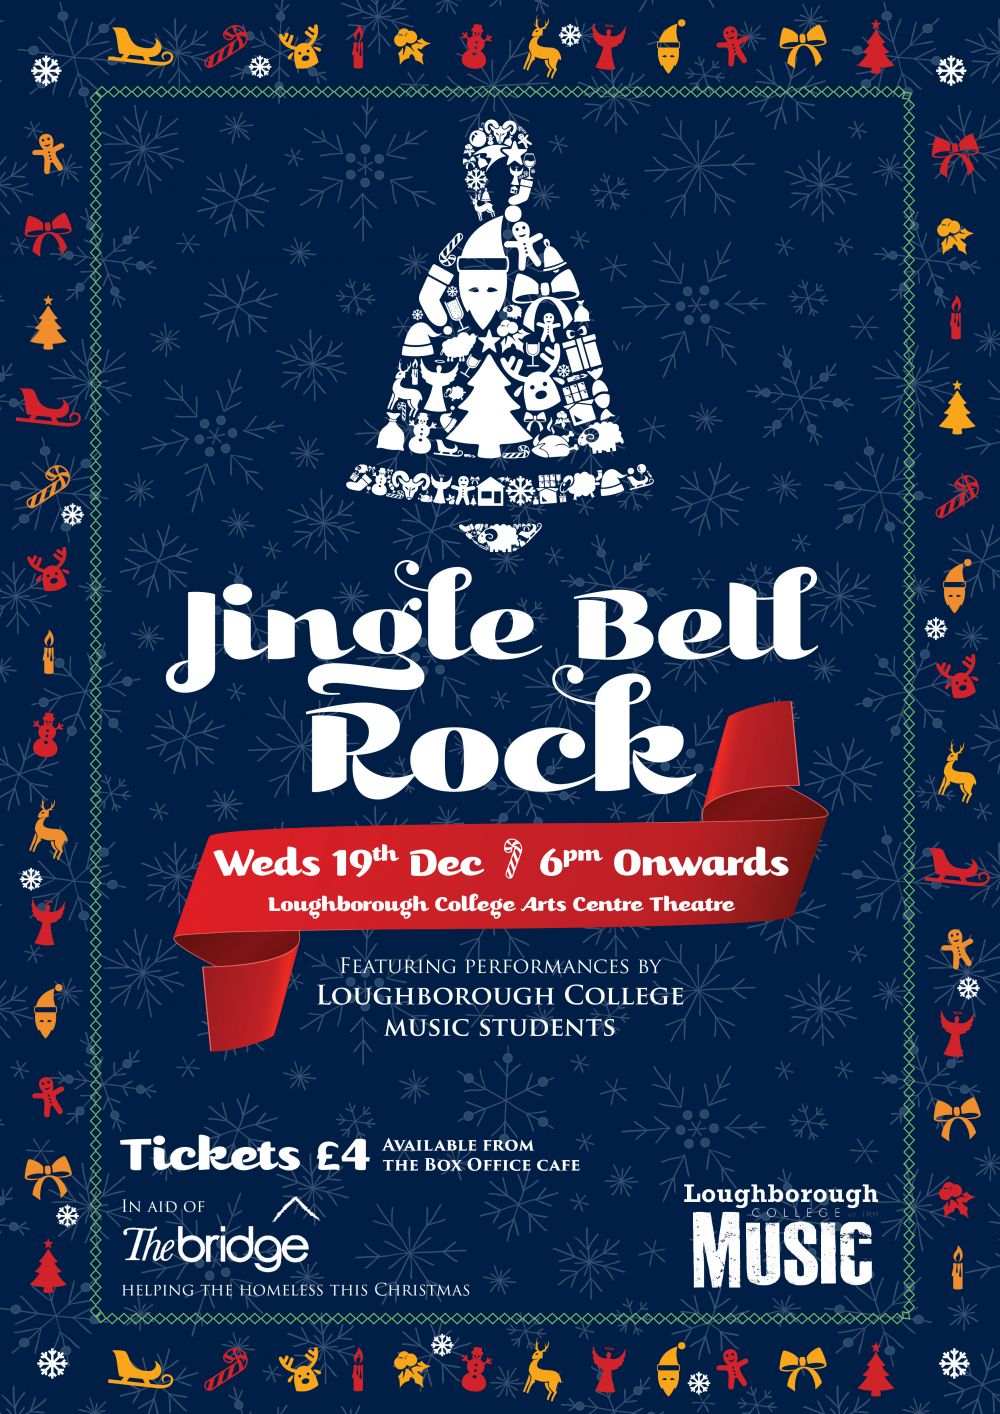 Charity fundraising gig set to Jingle Bell Rock Loughborough College